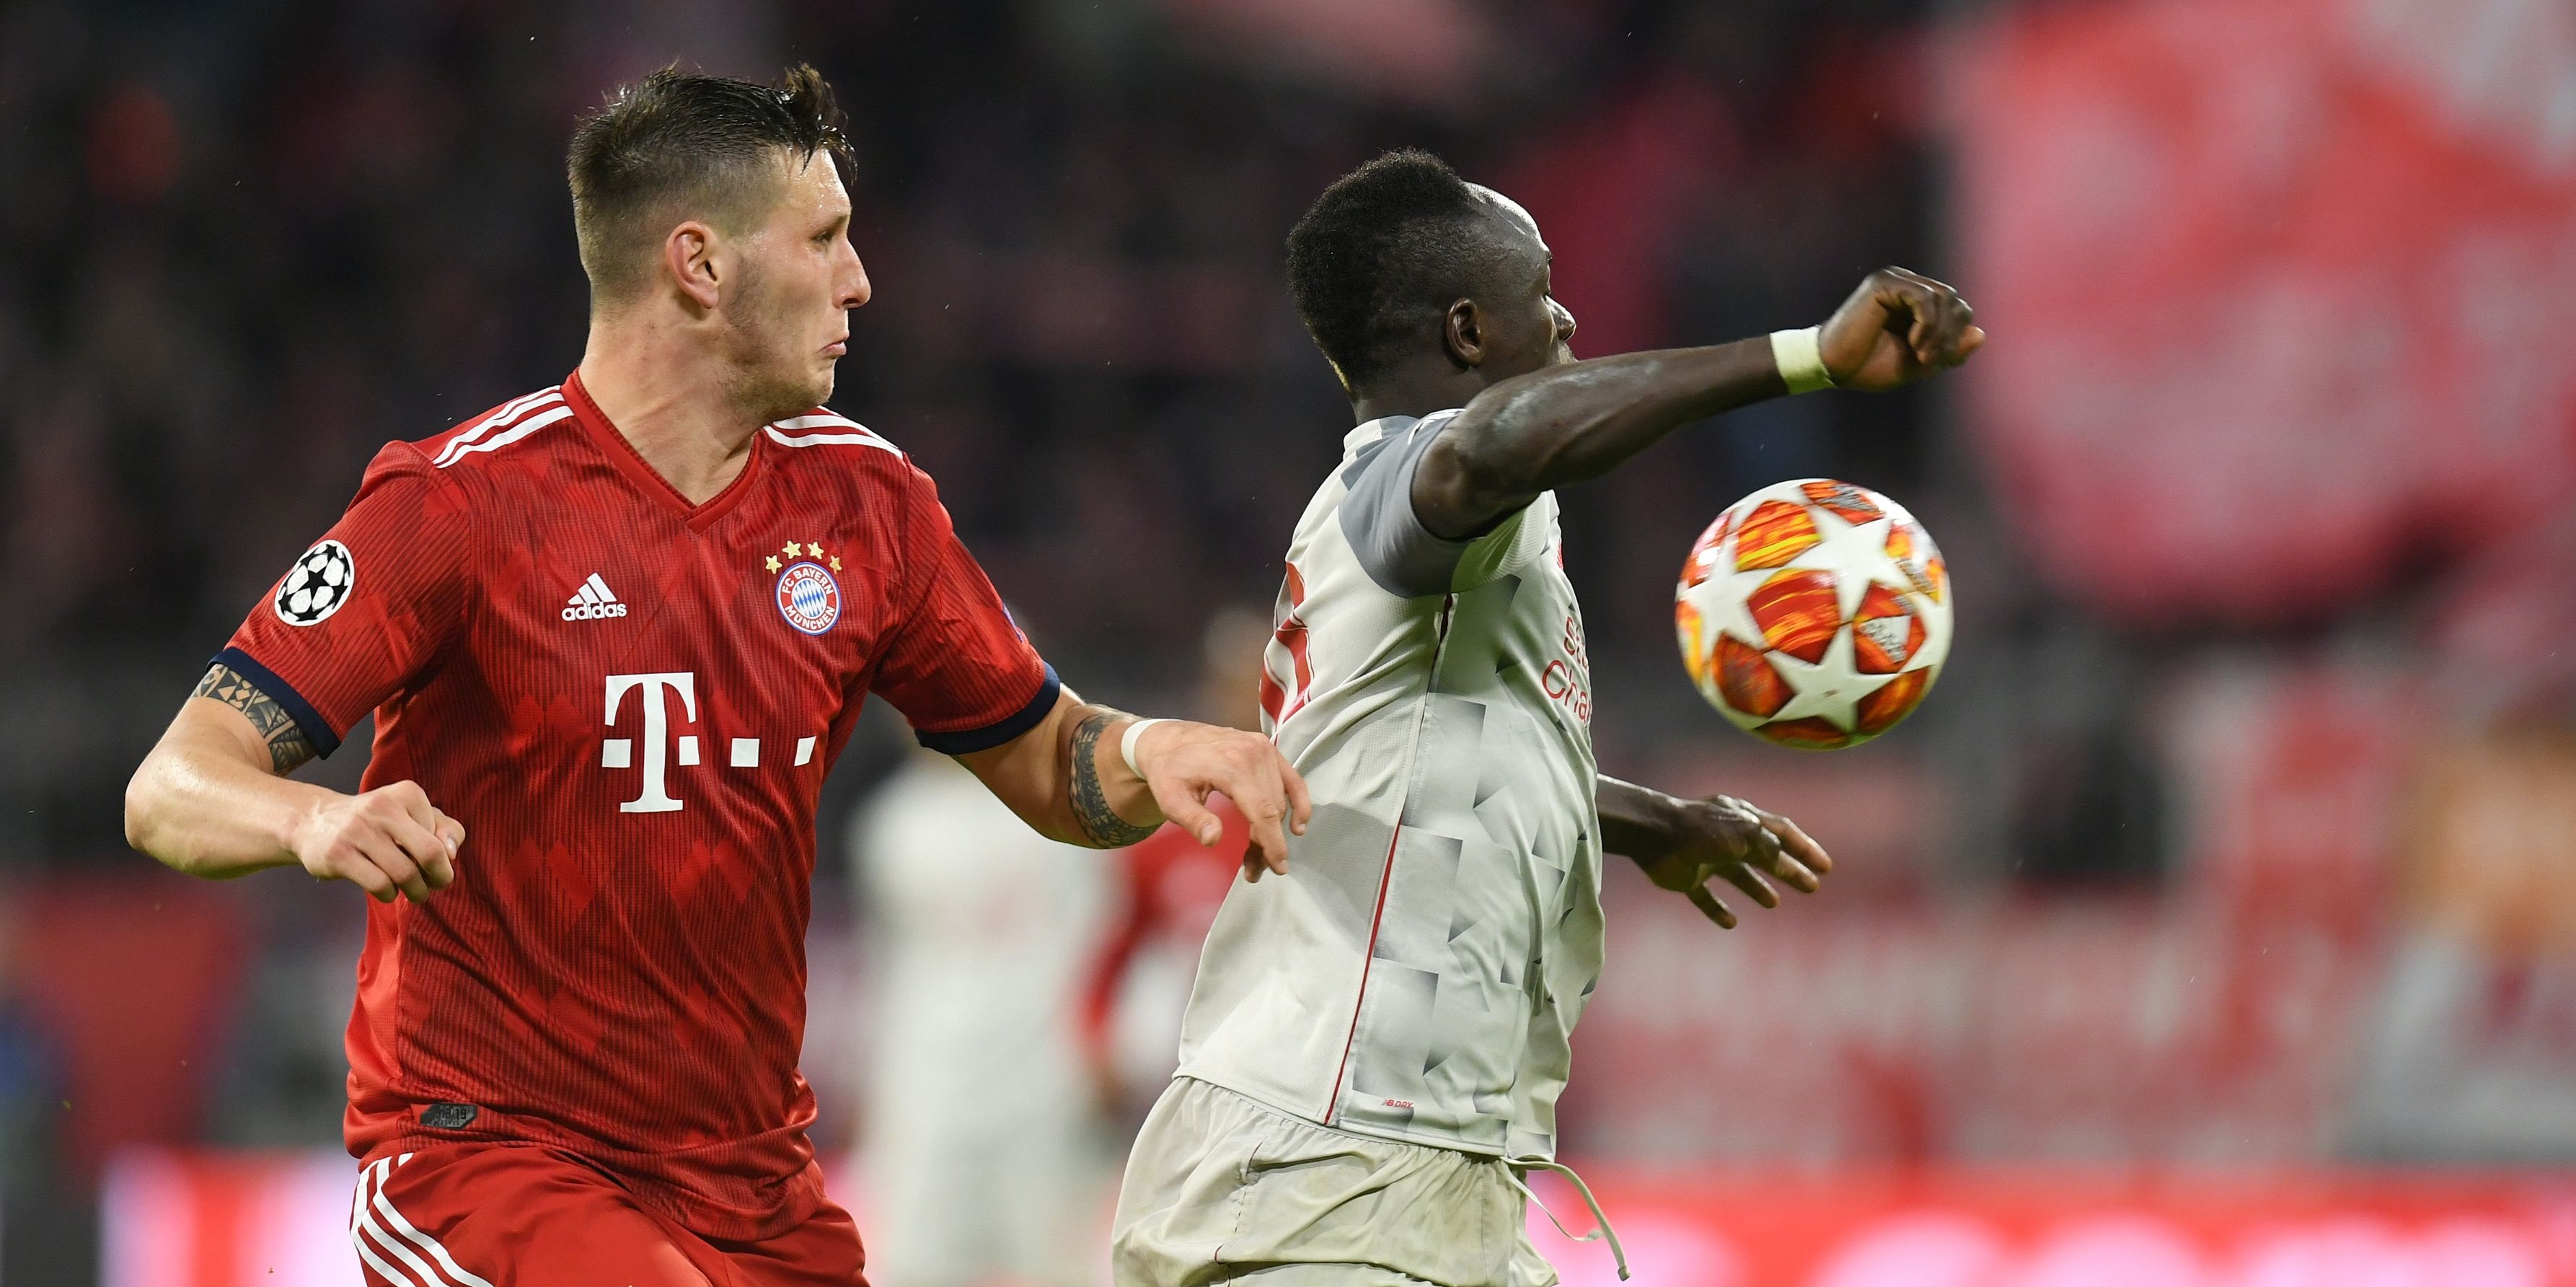 Bayern convinced second Mane offer will meet Liverpool demands despite fee falling £12.7m short of asking price – Sport1